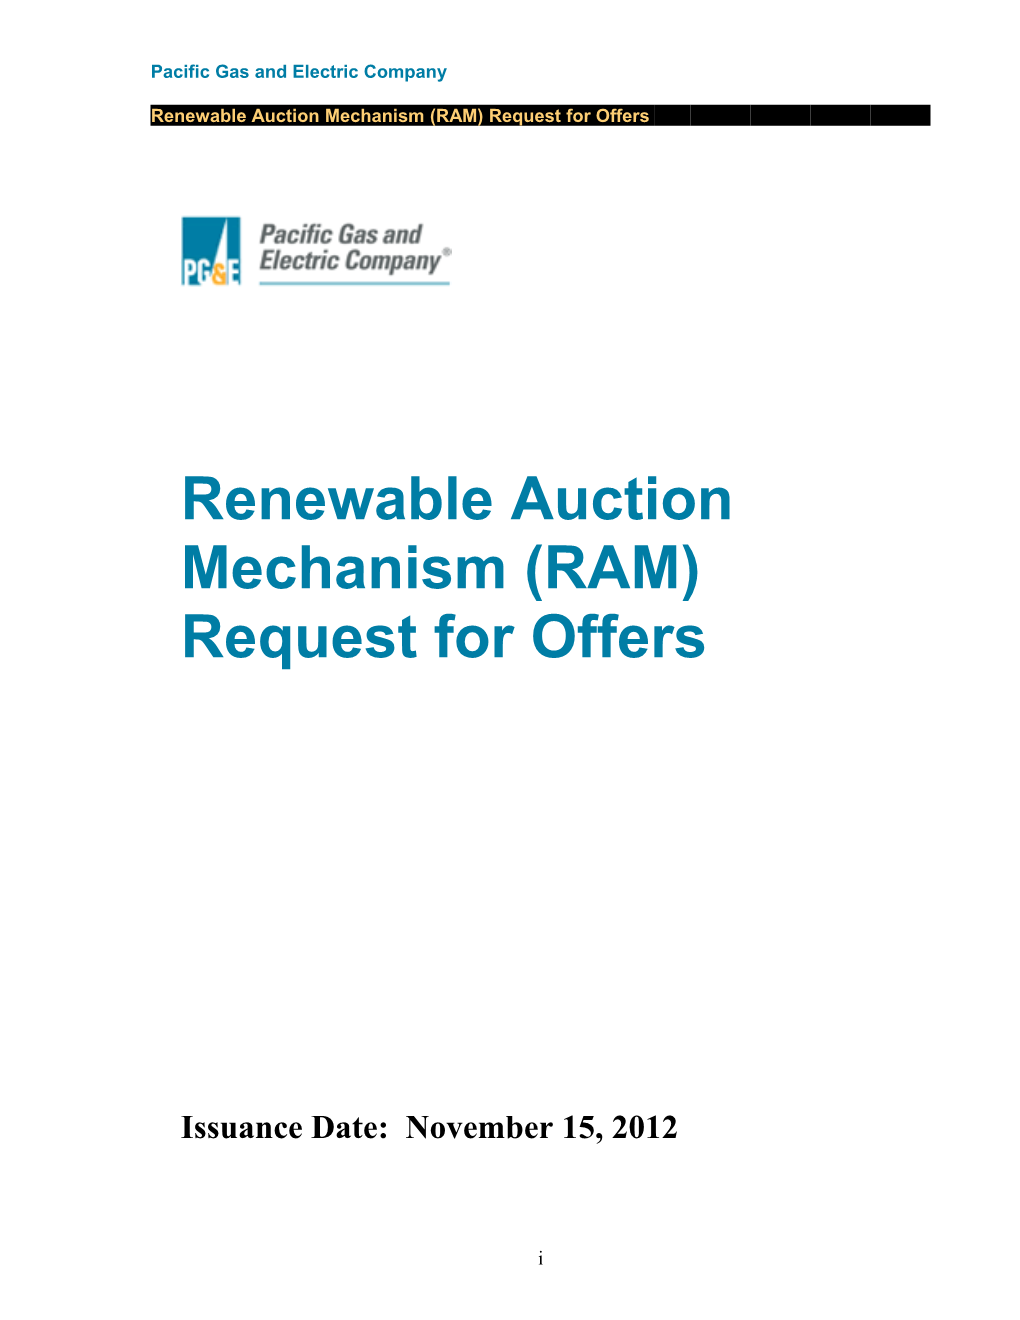 Renewable Auction Mechanism (RAM) Request for Offers